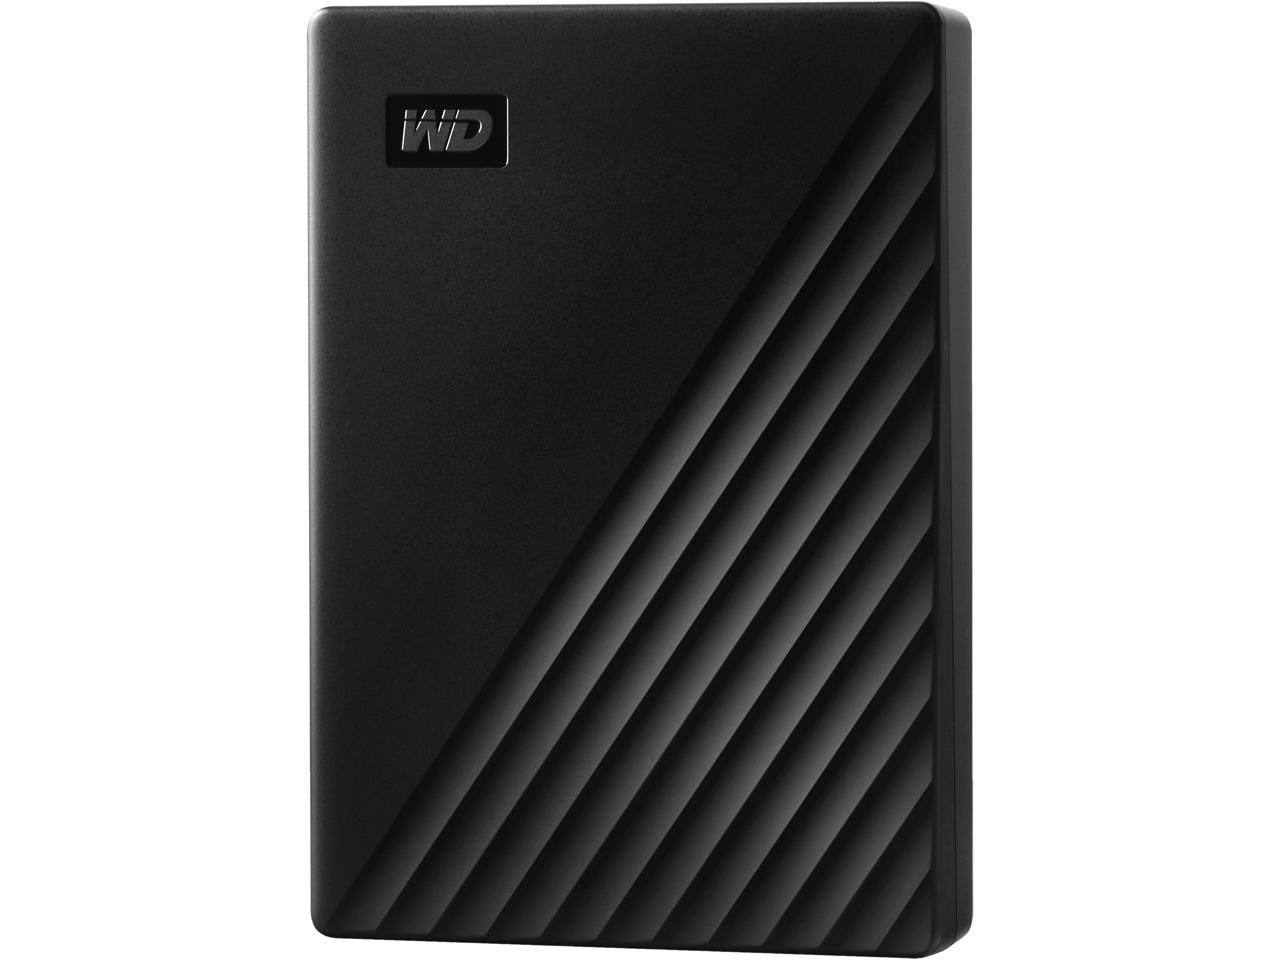 WD - My Passport 5TB External USB 3.0 Portable Hard Drive for $99.99 w/ Free Shipping after Code